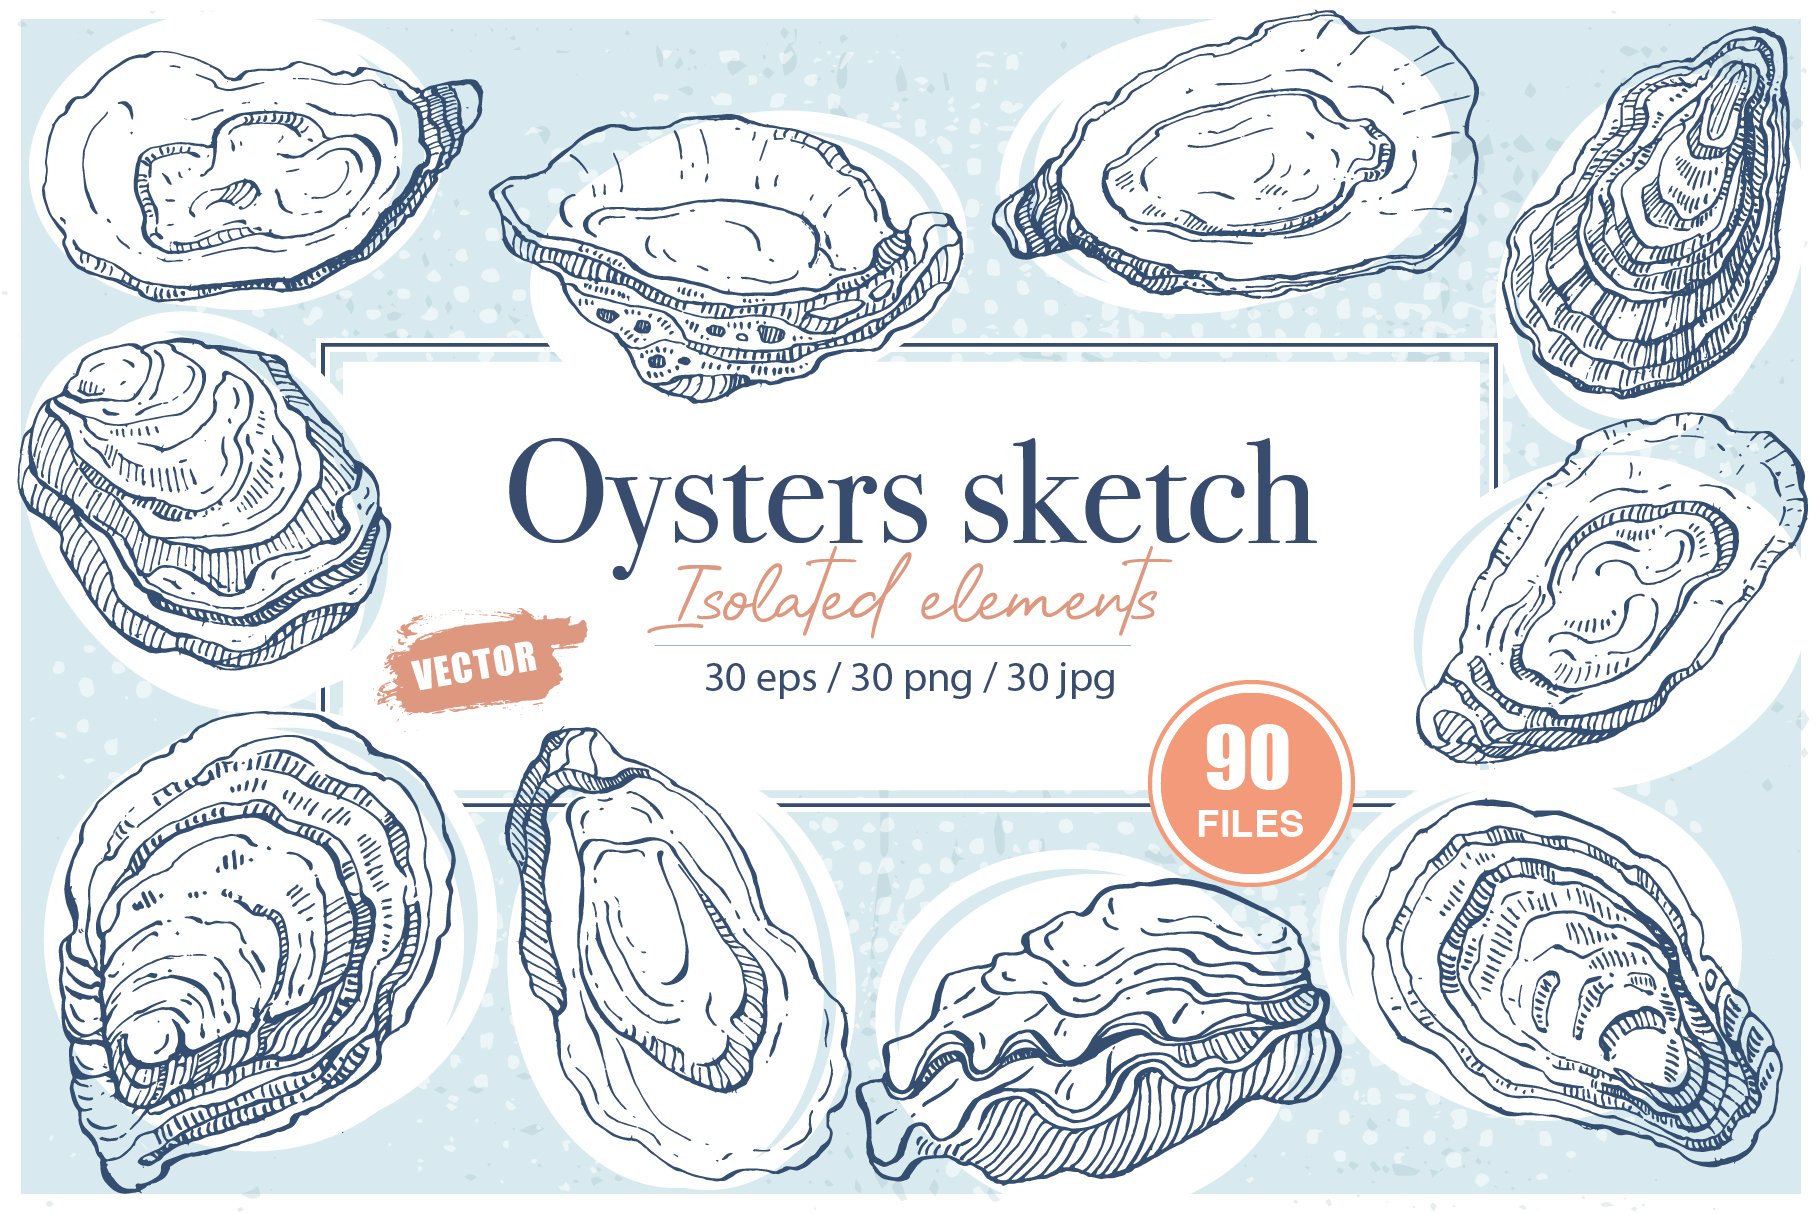 Oysters sketch ink drawing cover image.